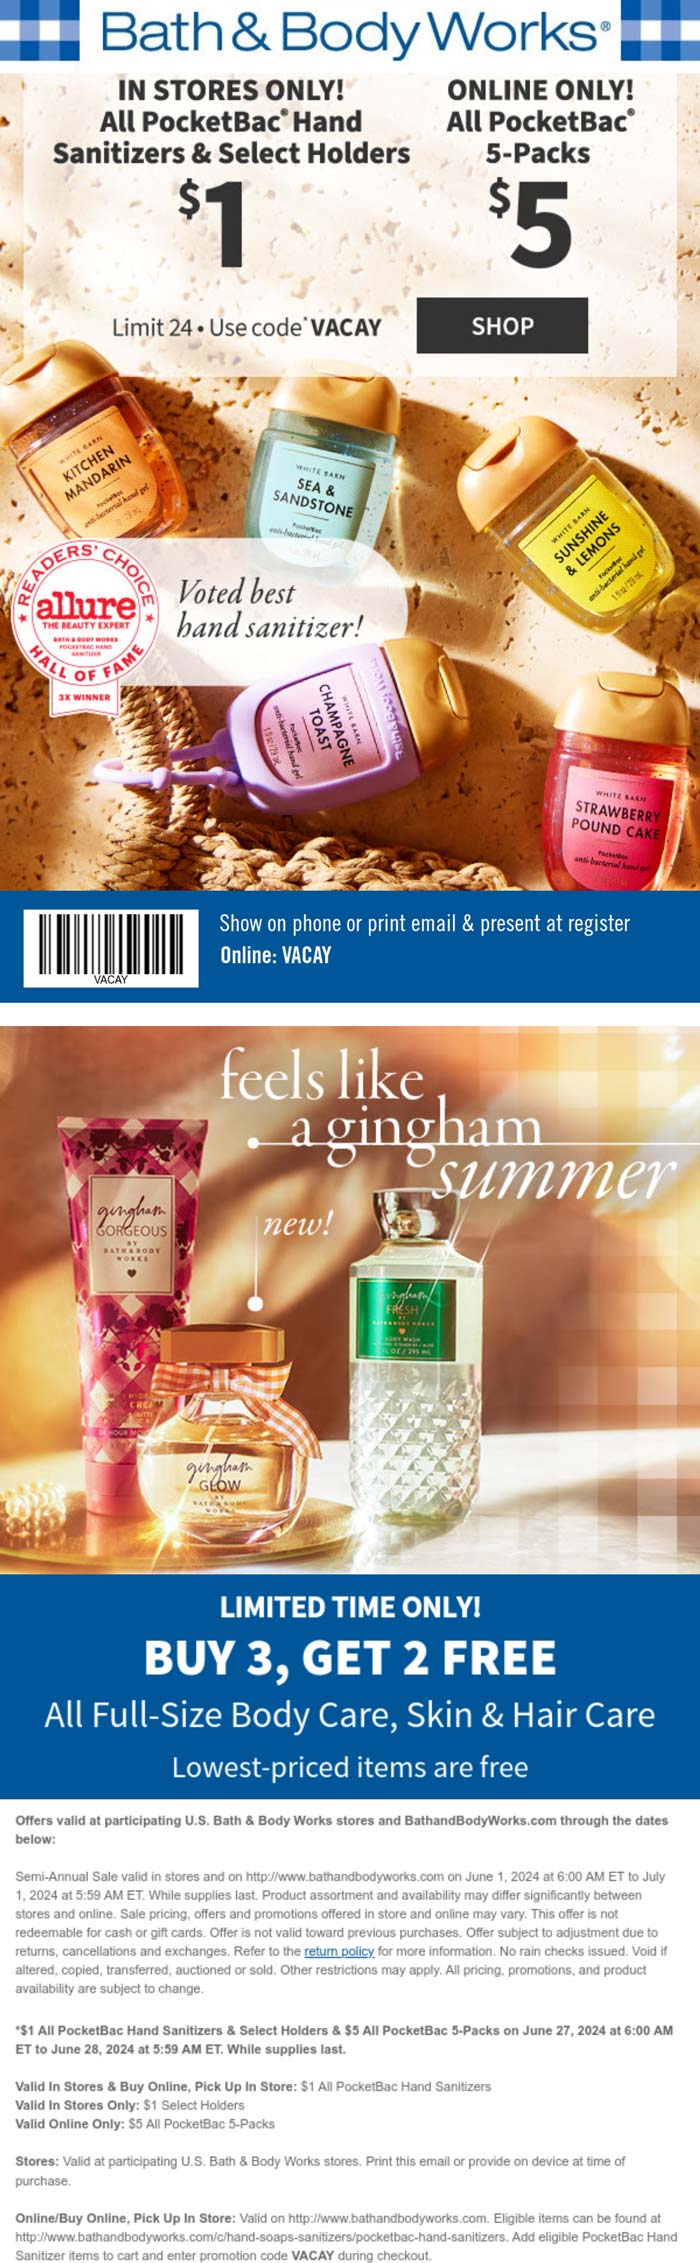 Bath & Body Works stores Coupon  $1 hand sanitizers today at Bath & Body Works, or online via promo code VACAY #bathbodyworks 